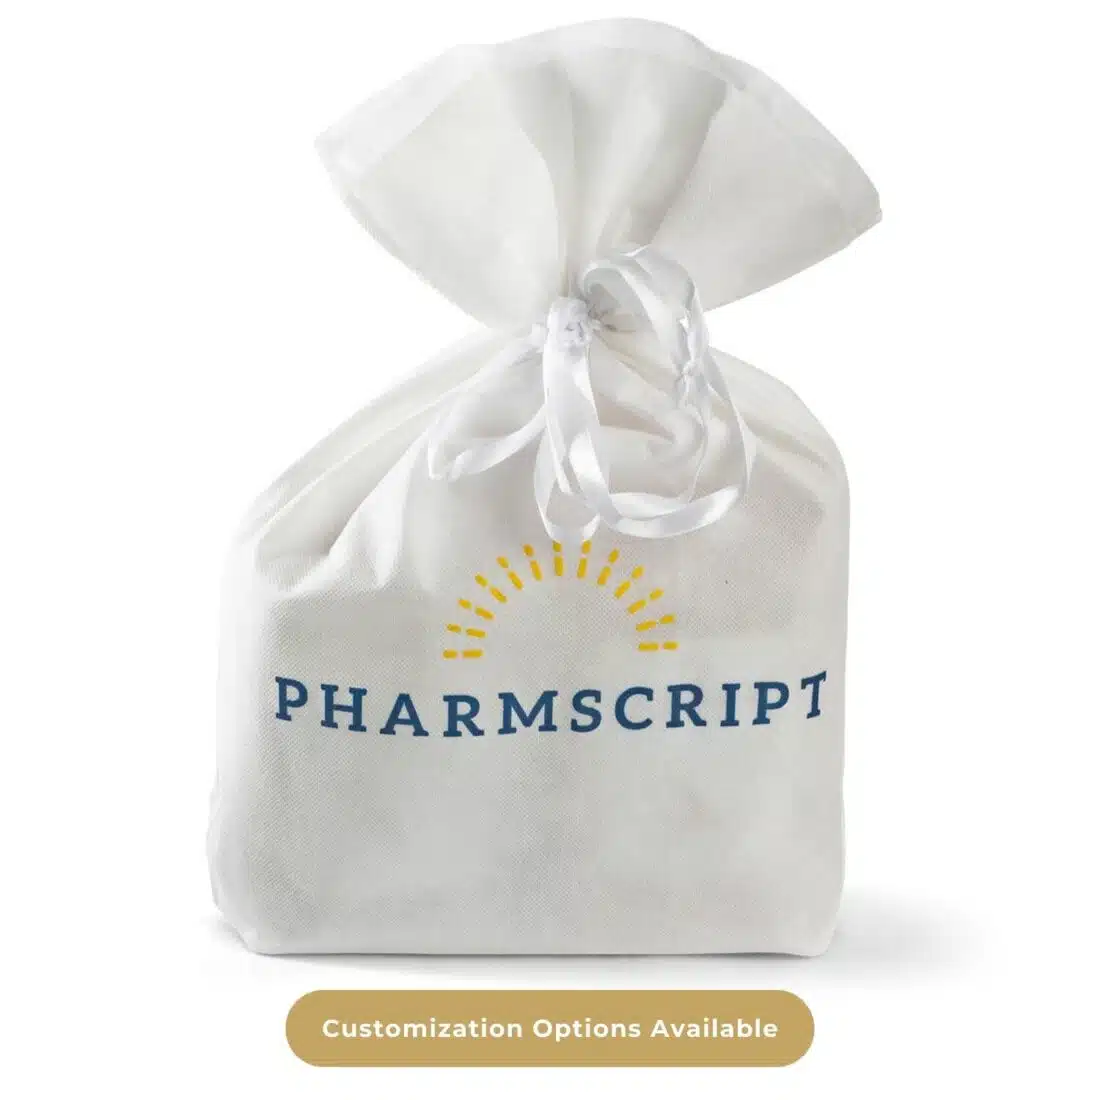 Gourmet Popcorn 3 flavor variety gift bag with your custom branding options for client gifts